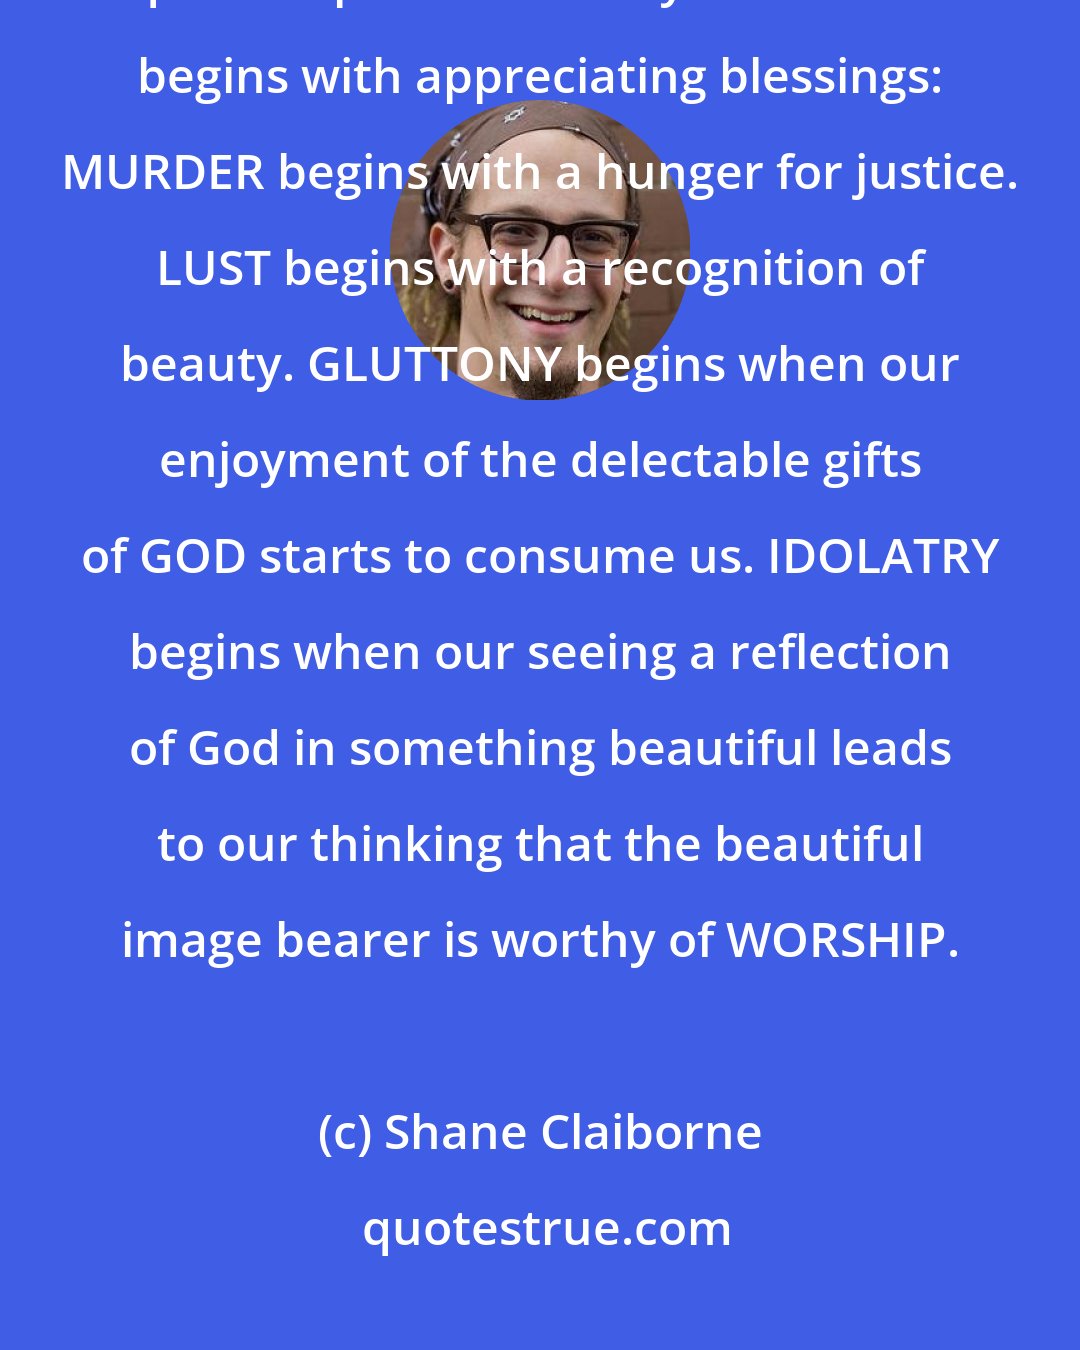 Shane Claiborne: MOST of the ugliness in the human narrative comes from a distorted quest to possess beauty. COVETING begins with appreciating blessings: MURDER begins with a hunger for justice. LUST begins with a recognition of beauty. GLUTTONY begins when our enjoyment of the delectable gifts of GOD starts to consume us. IDOLATRY begins when our seeing a reflection of God in something beautiful leads to our thinking that the beautiful image bearer is worthy of WORSHIP.